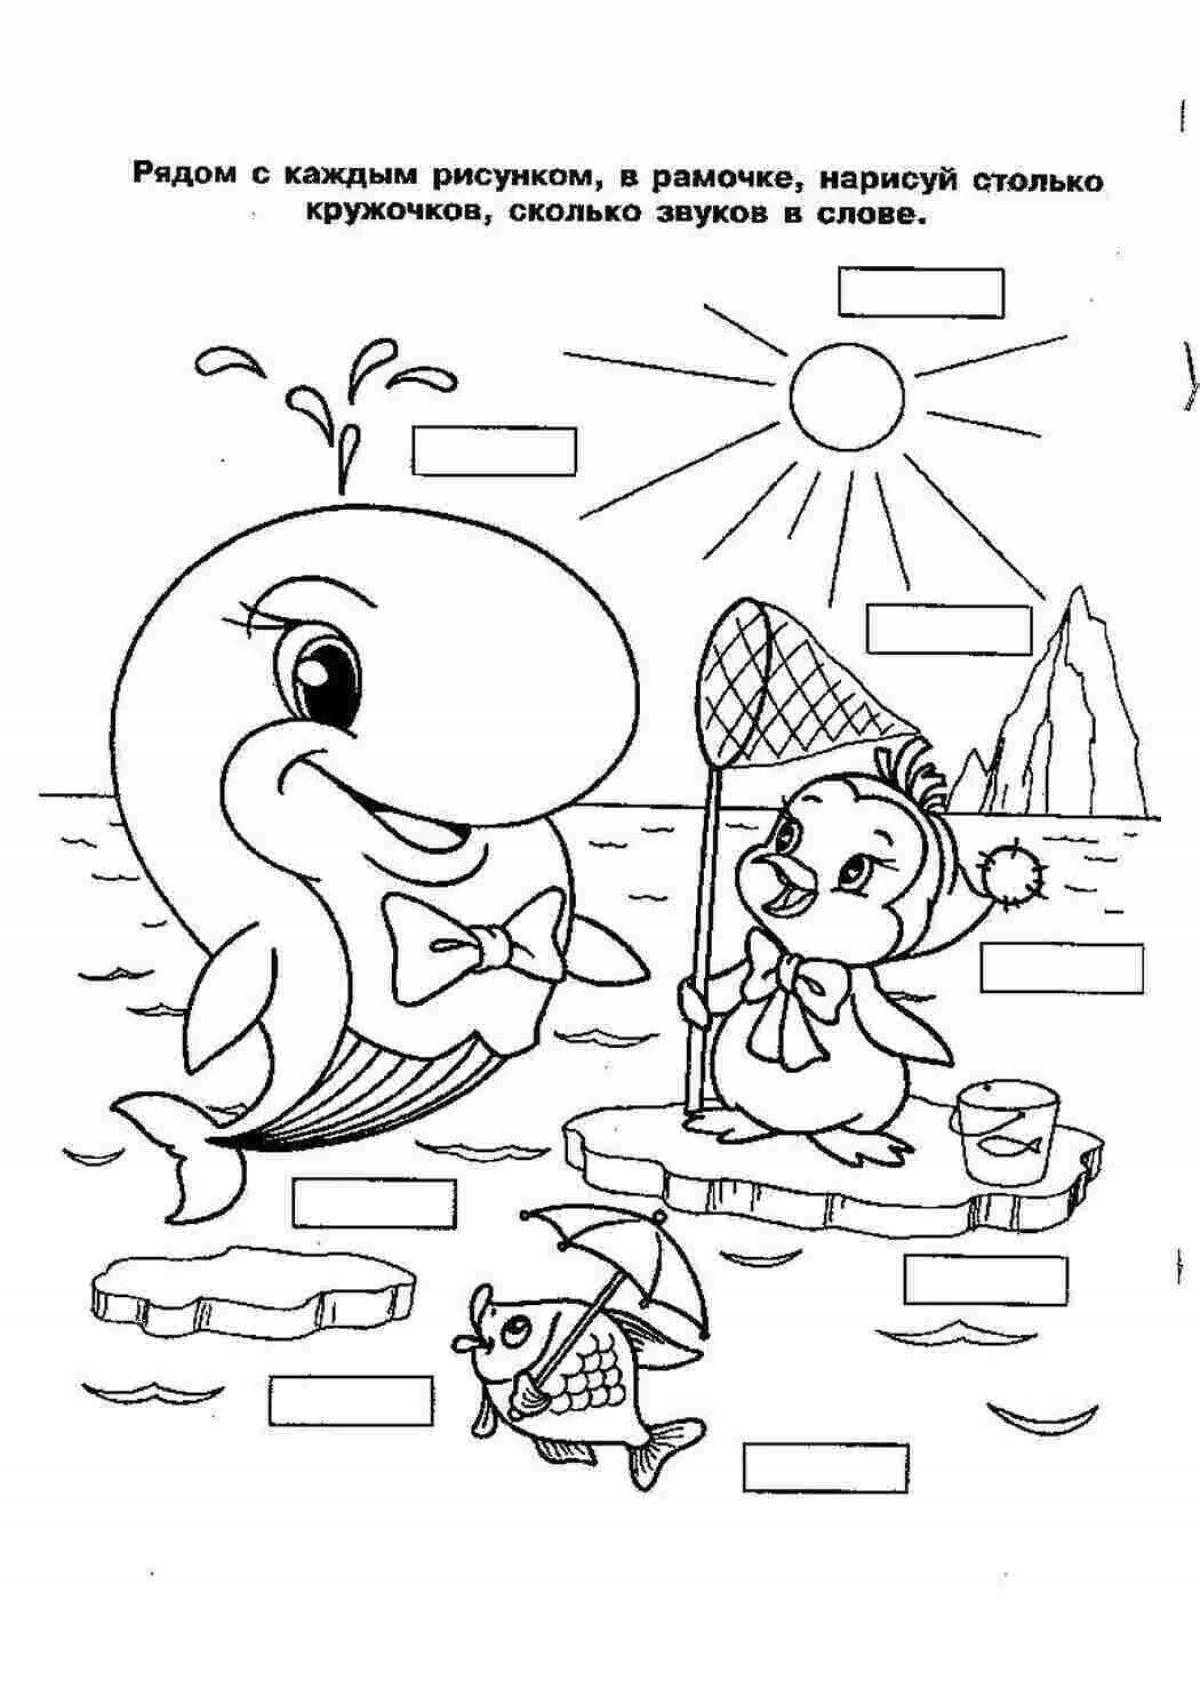 Amazing syllable coloring pages for preschoolers 6-7 years old